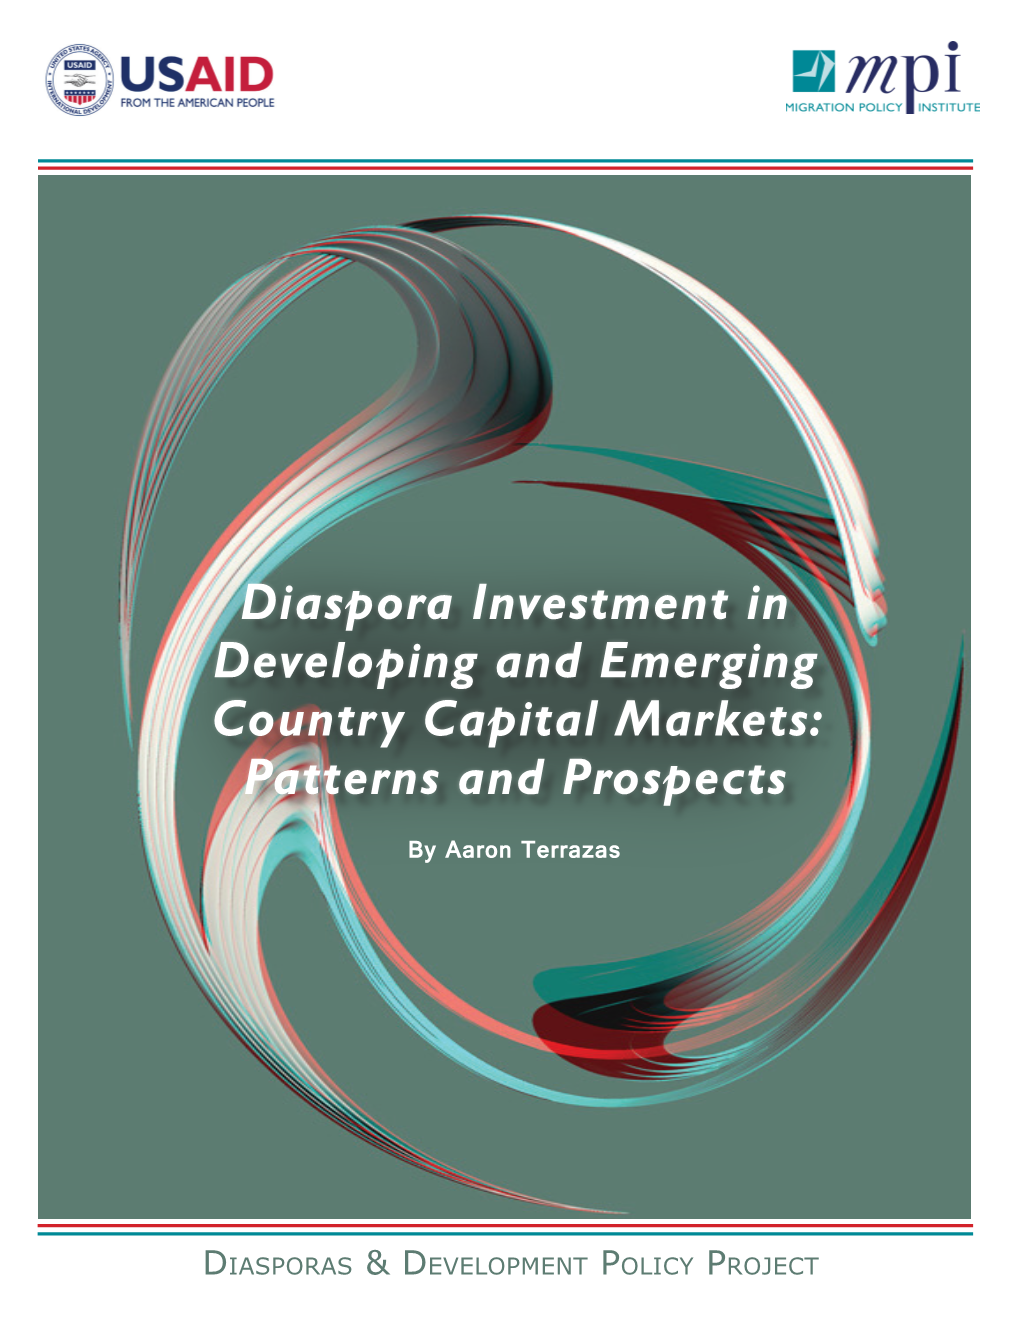 Diaspora Investment in Developing and Emerging Country Capital Markets: Patterns and Prospects